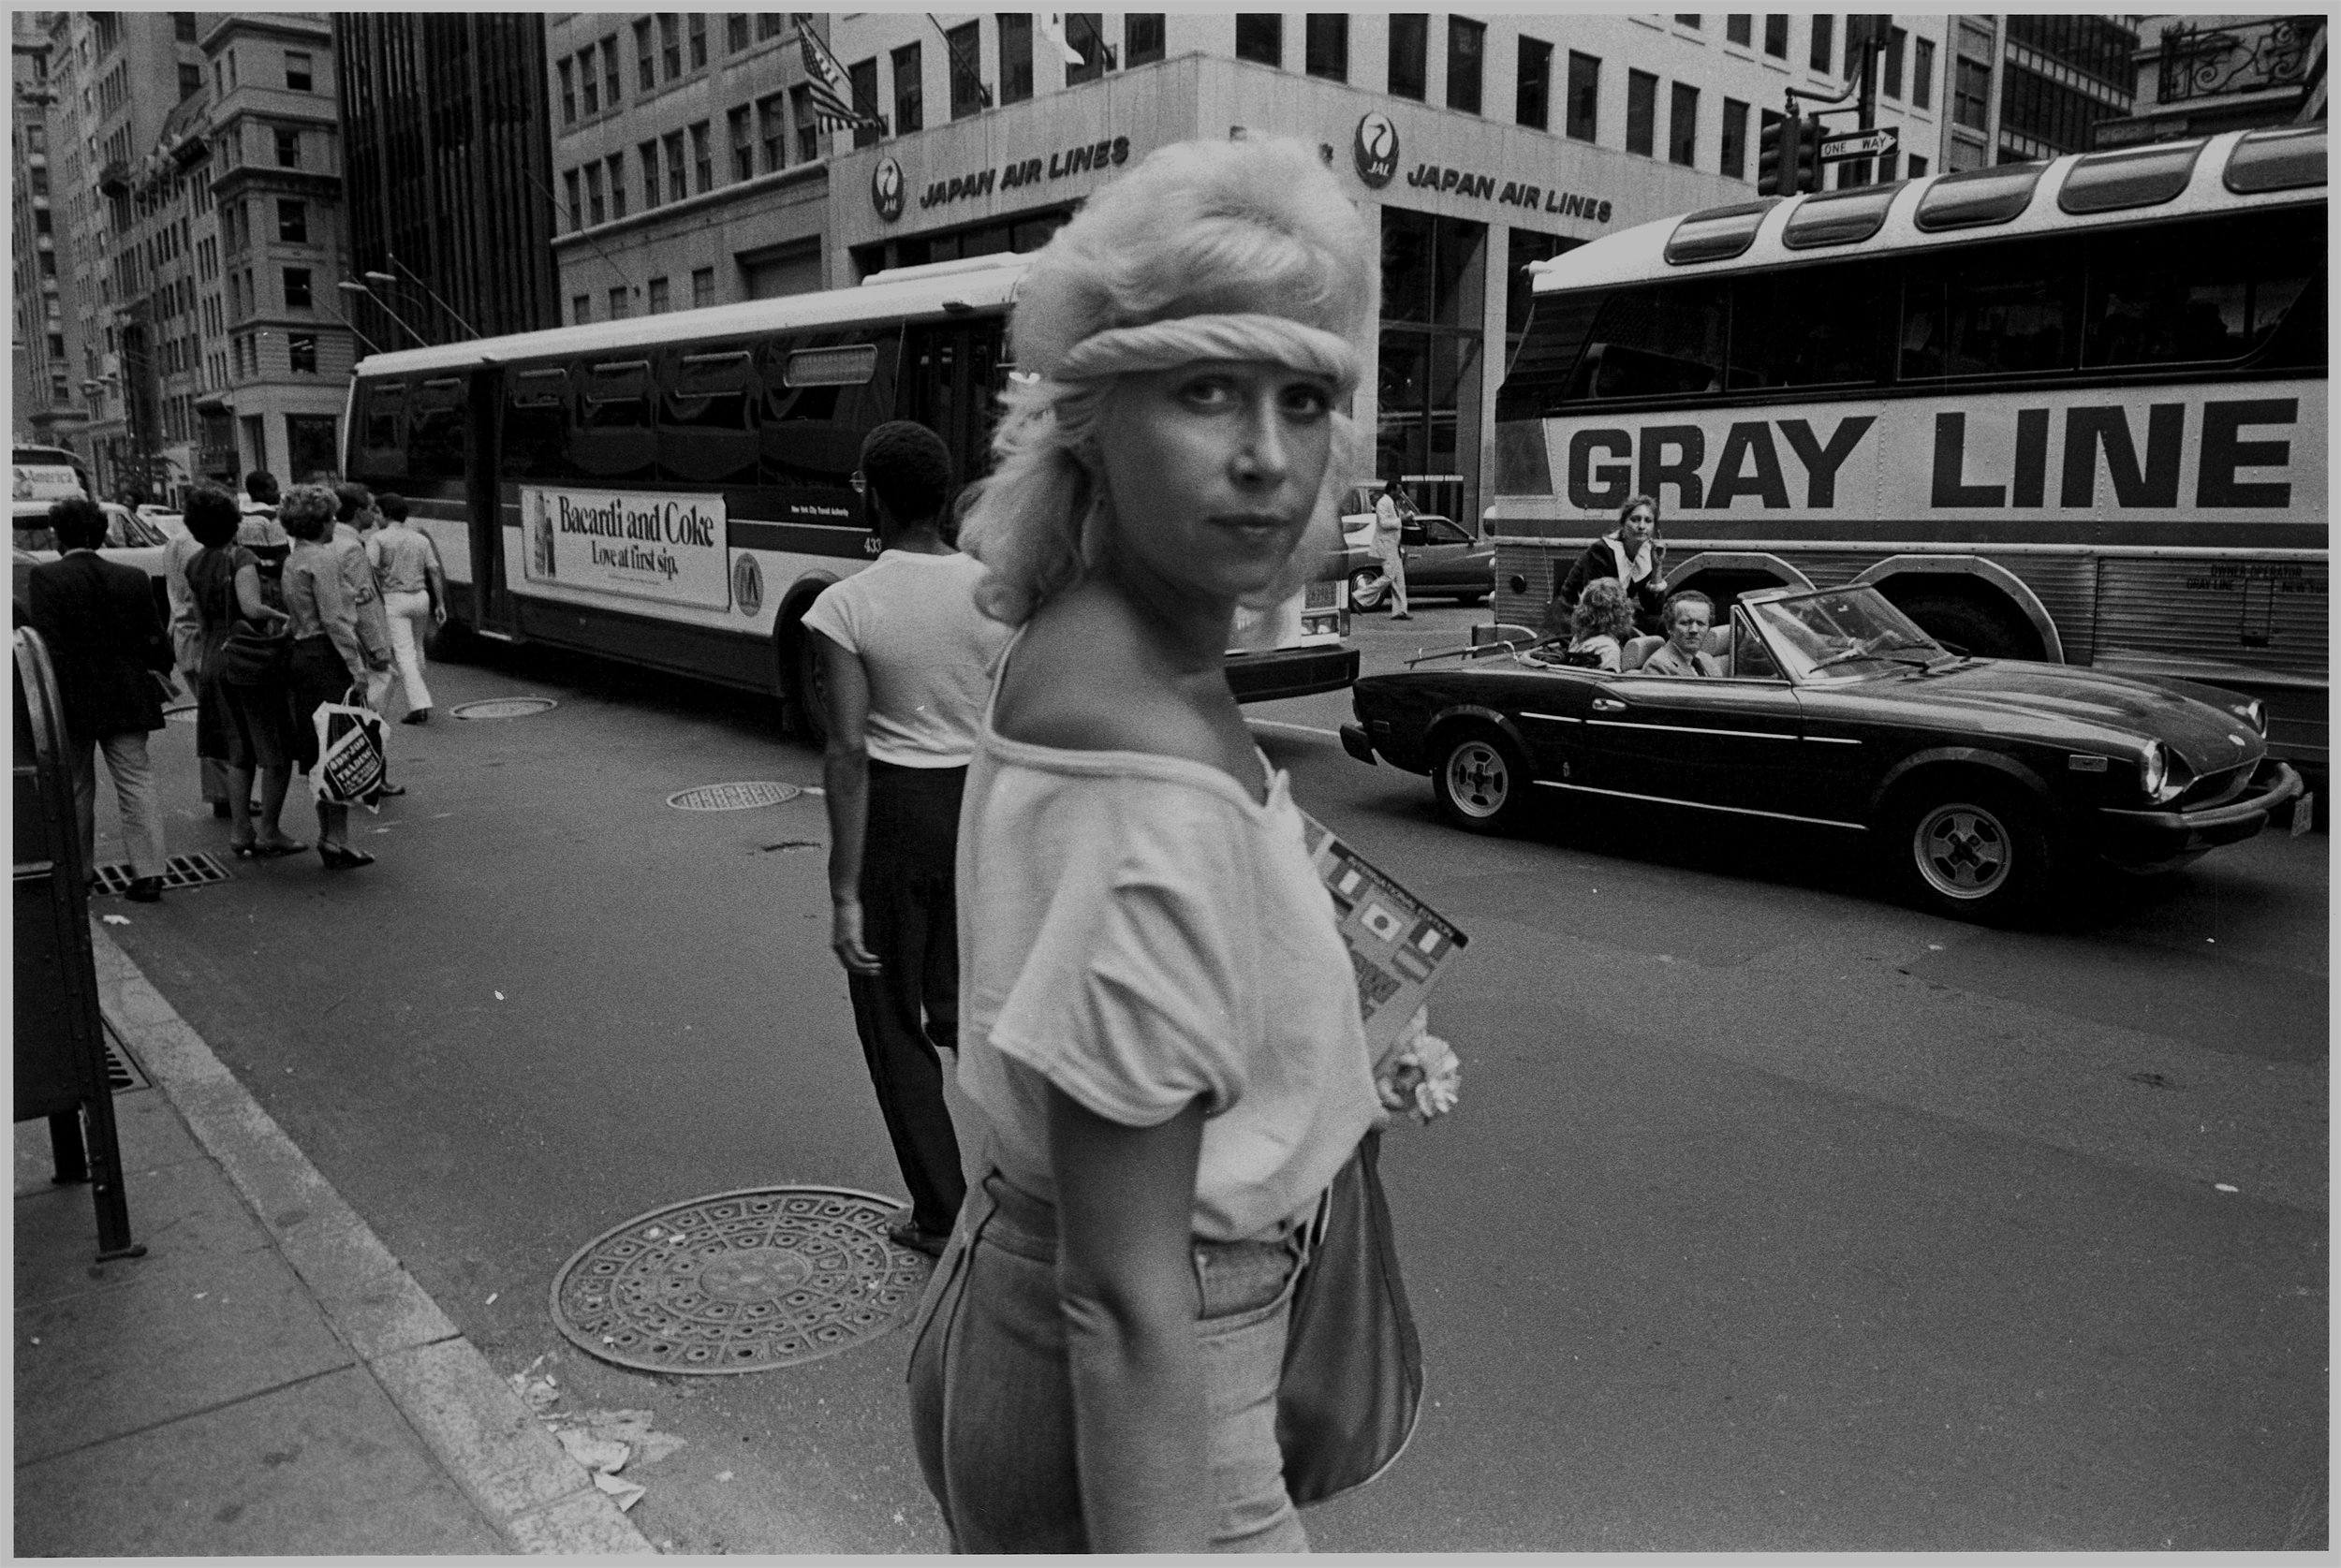 blonde with headband + grayline bus, 5th ave., nyc, mid 1980’s